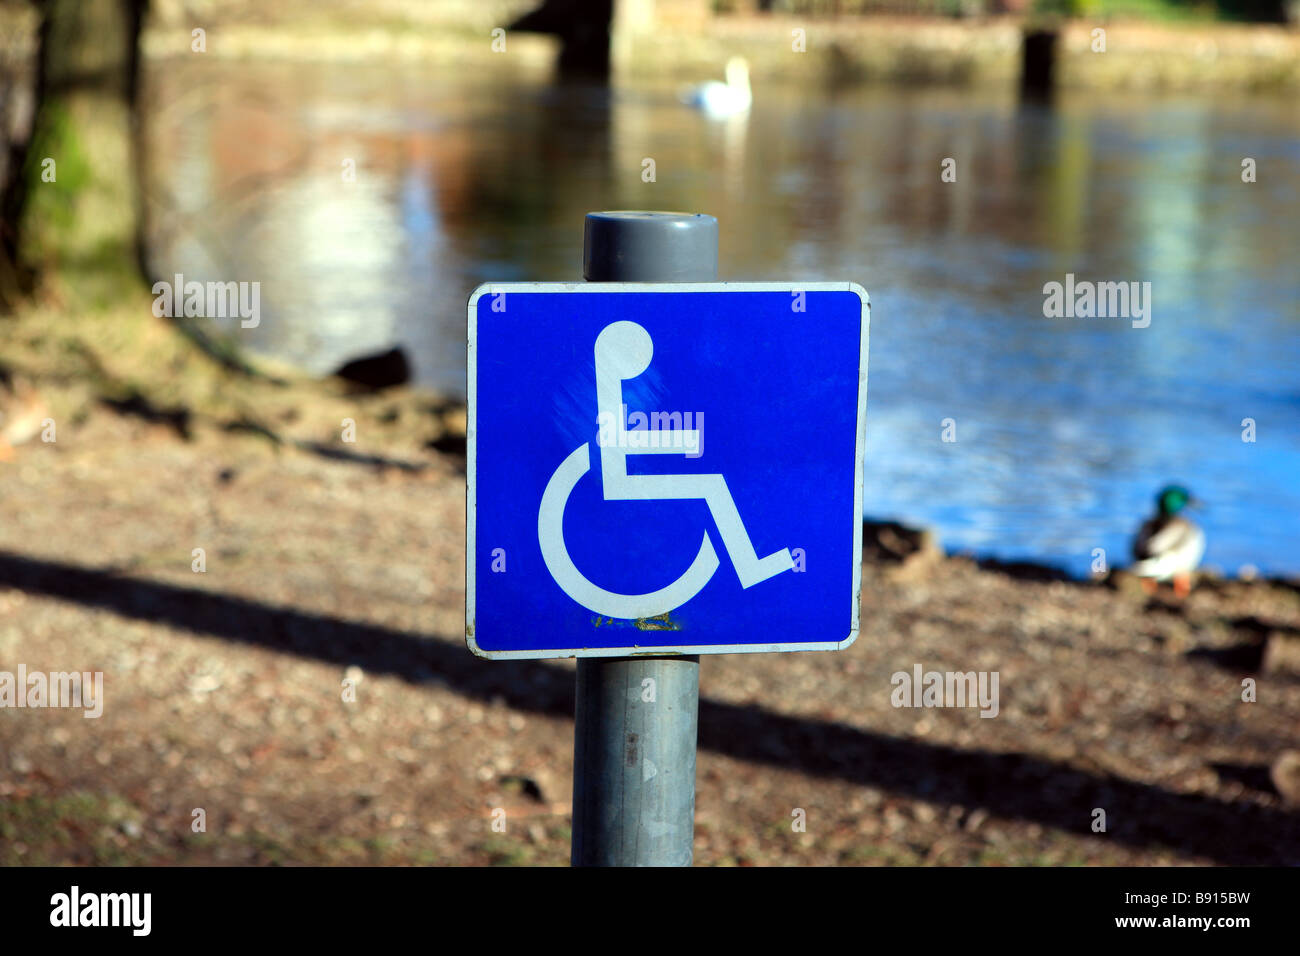 Disabled parking sign Stock Photo